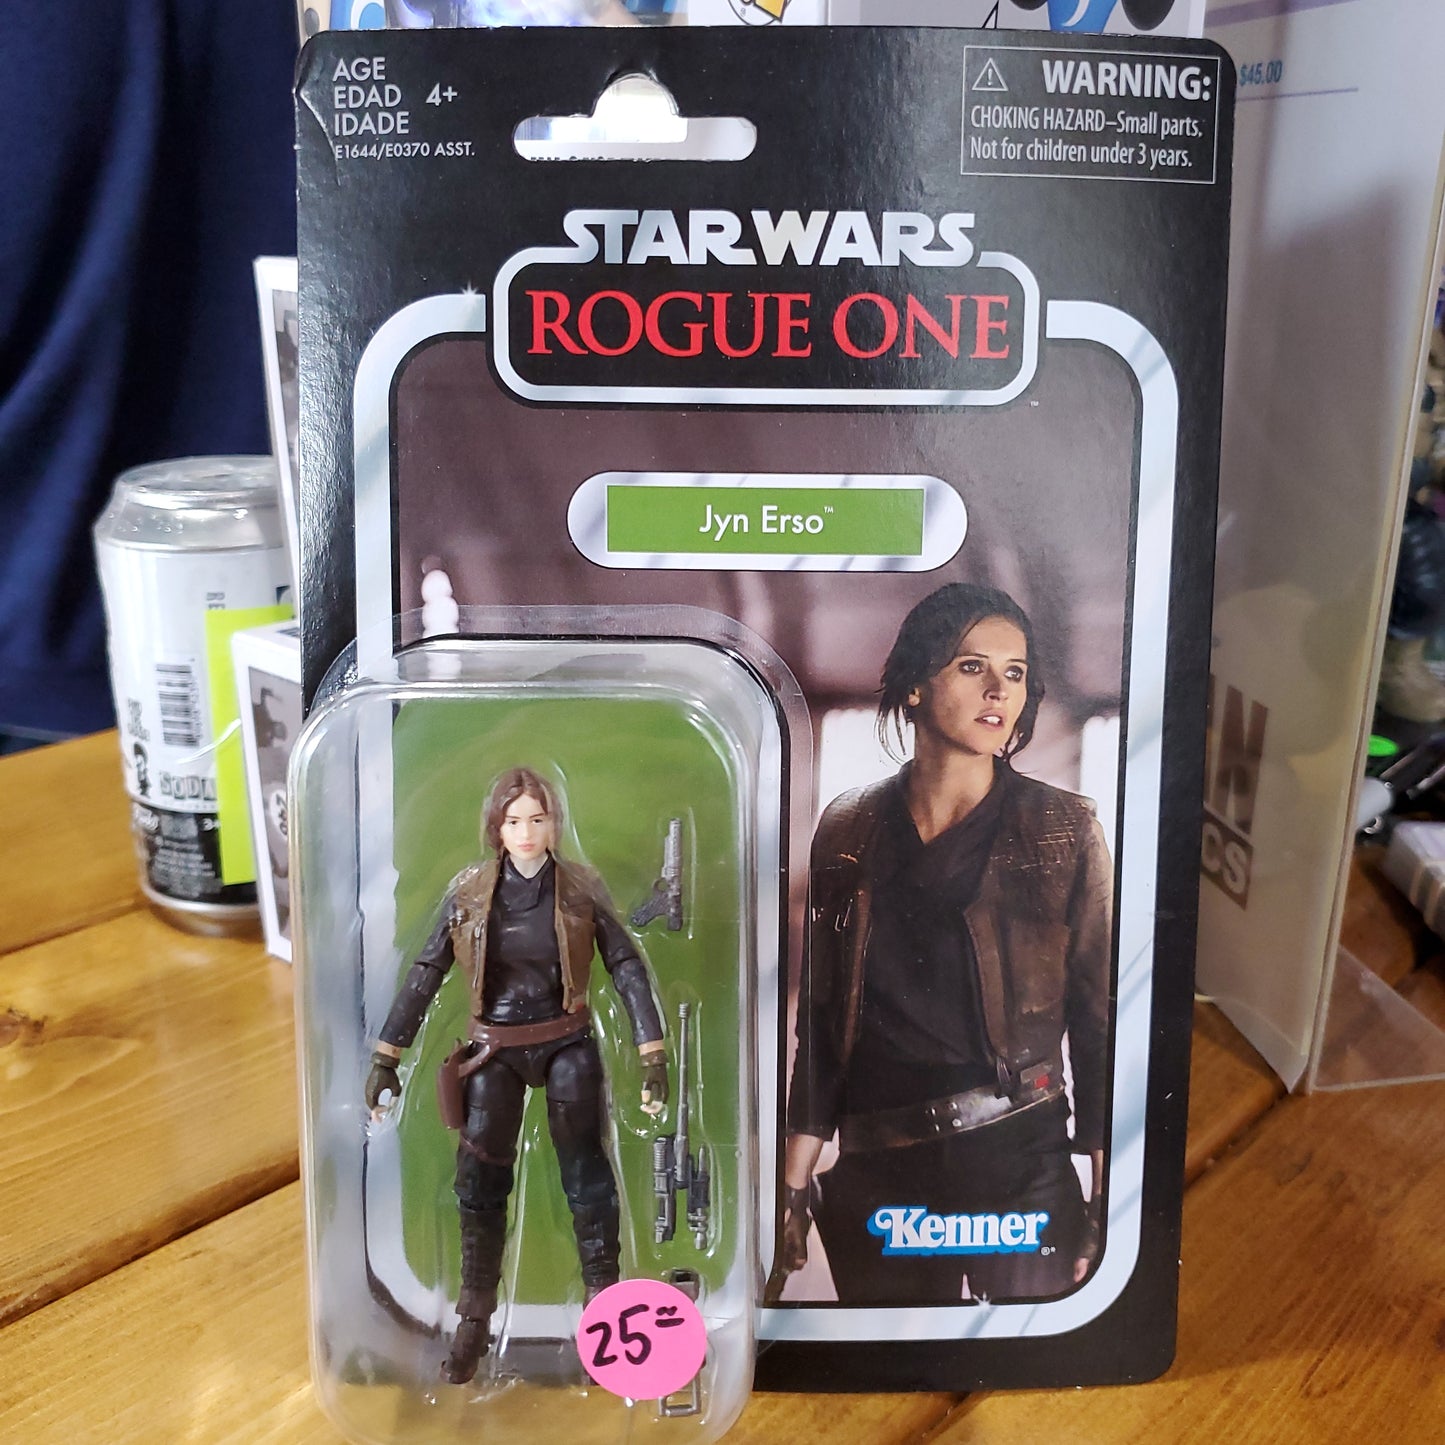 Star Wars: Rogue One - Jyn Erso - Hasbro Action Figure